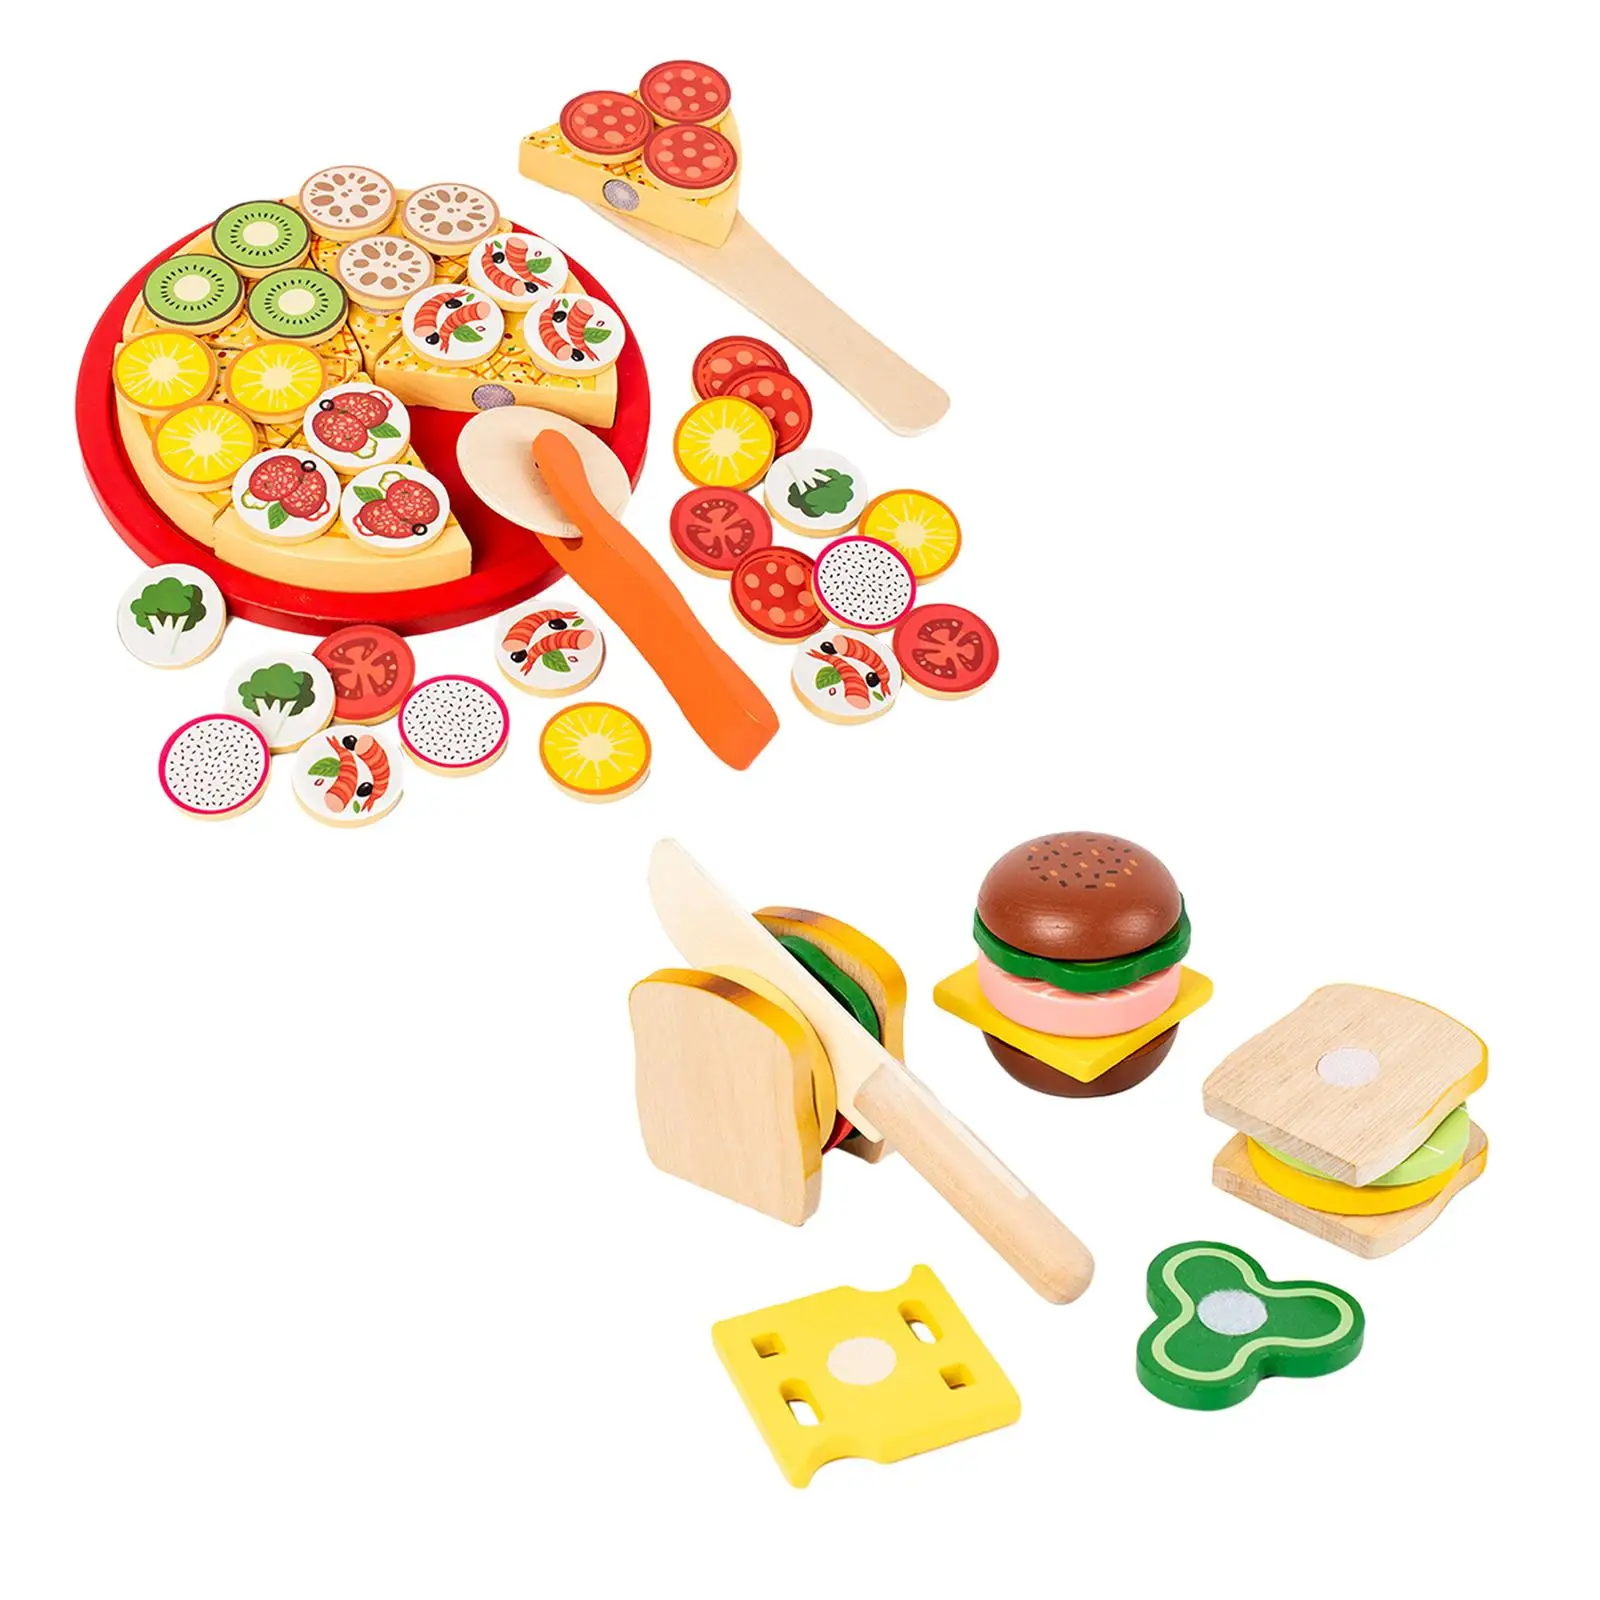 Toddlers Pretend Cooking Toys Pretend Play Food Set for Window Display Birthday DIY Model Landscape Decorations Furnishings